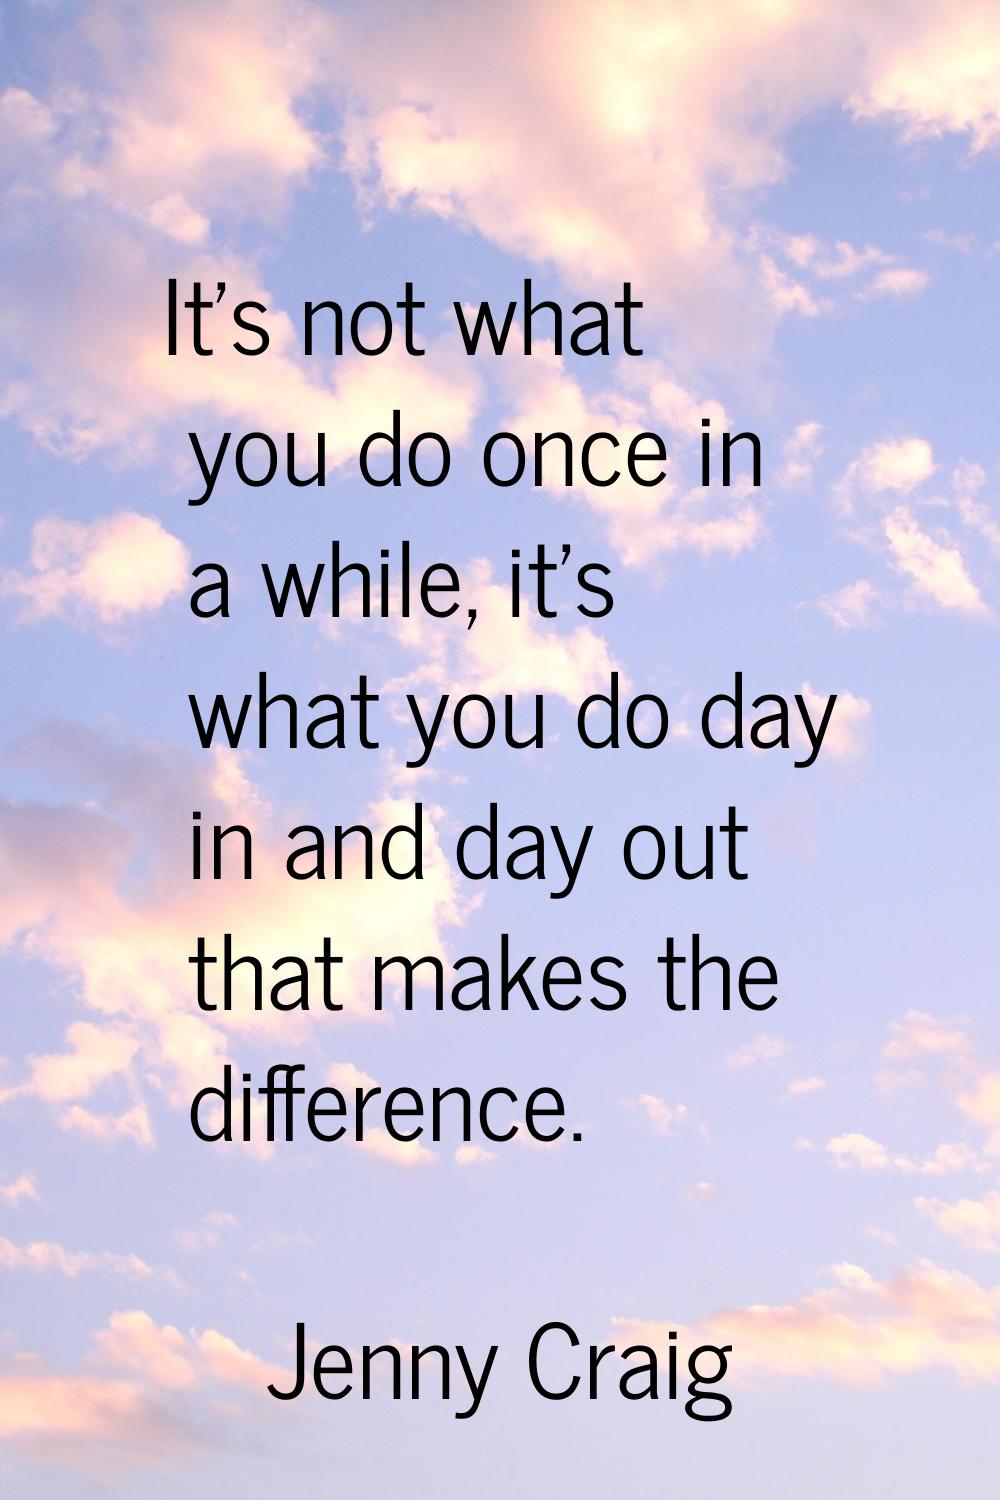 It's not what you do once in a while, it's what you do day in and day out that makes the difference